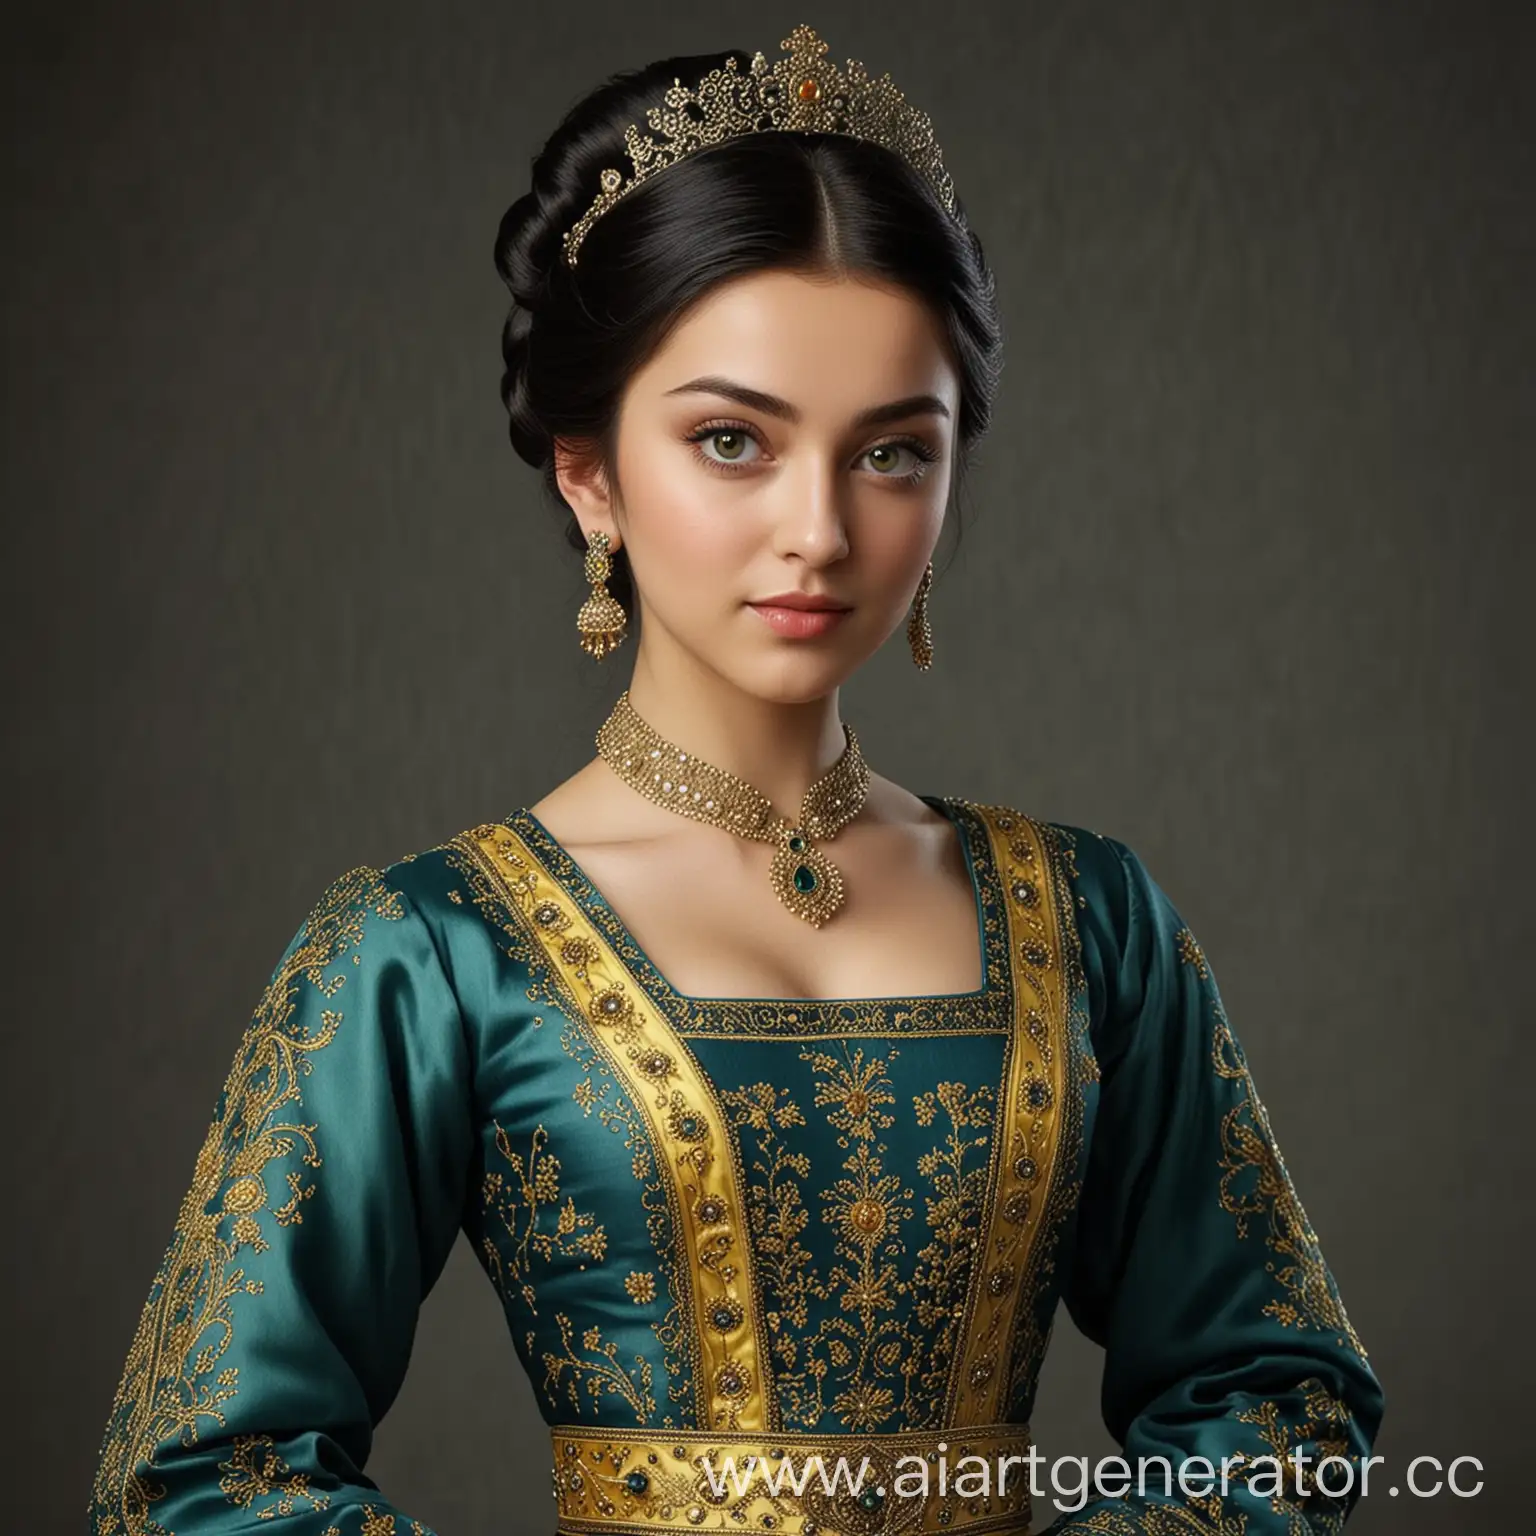 Young-Woman-in-Blue-Satin-Dress-with-Yellow-Embroidery-Magnificent-Century-Realistic-Portrait